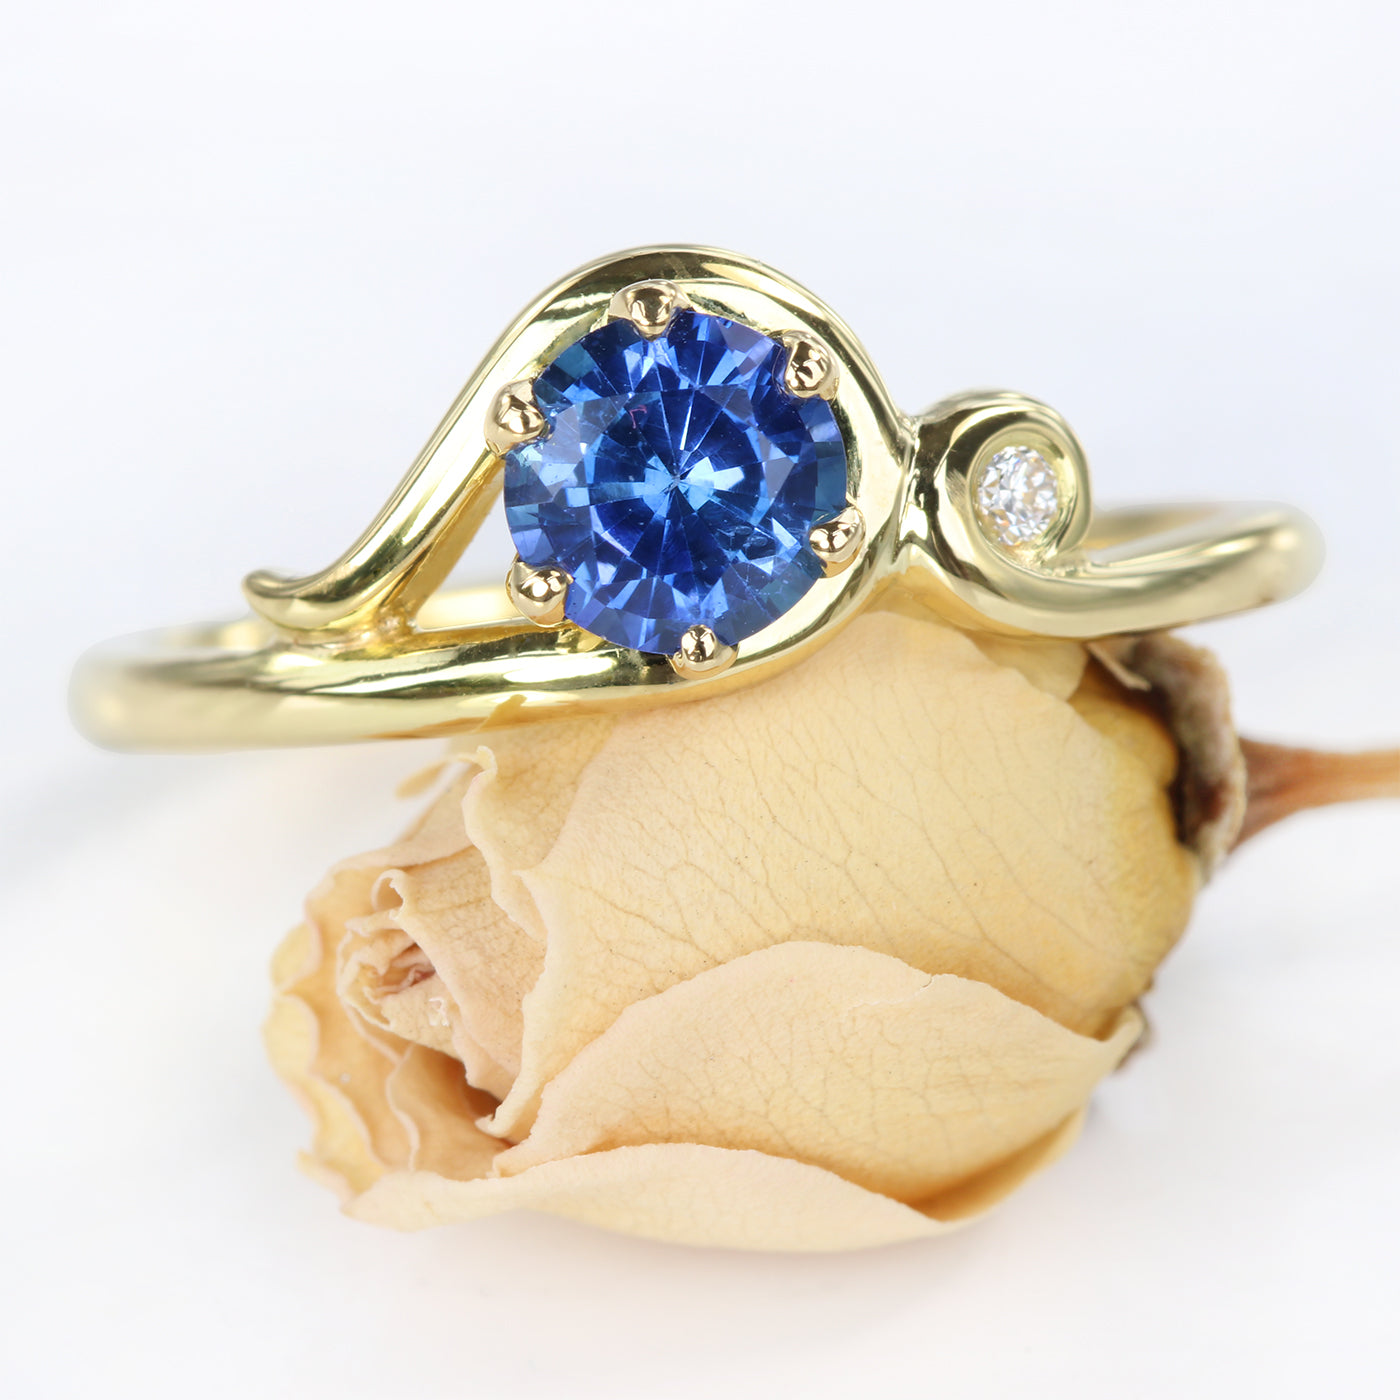 18ct Gold Sapphire and Diamond Art Nouveau Inspired Ring (Size J, Resize G - J 1/2)